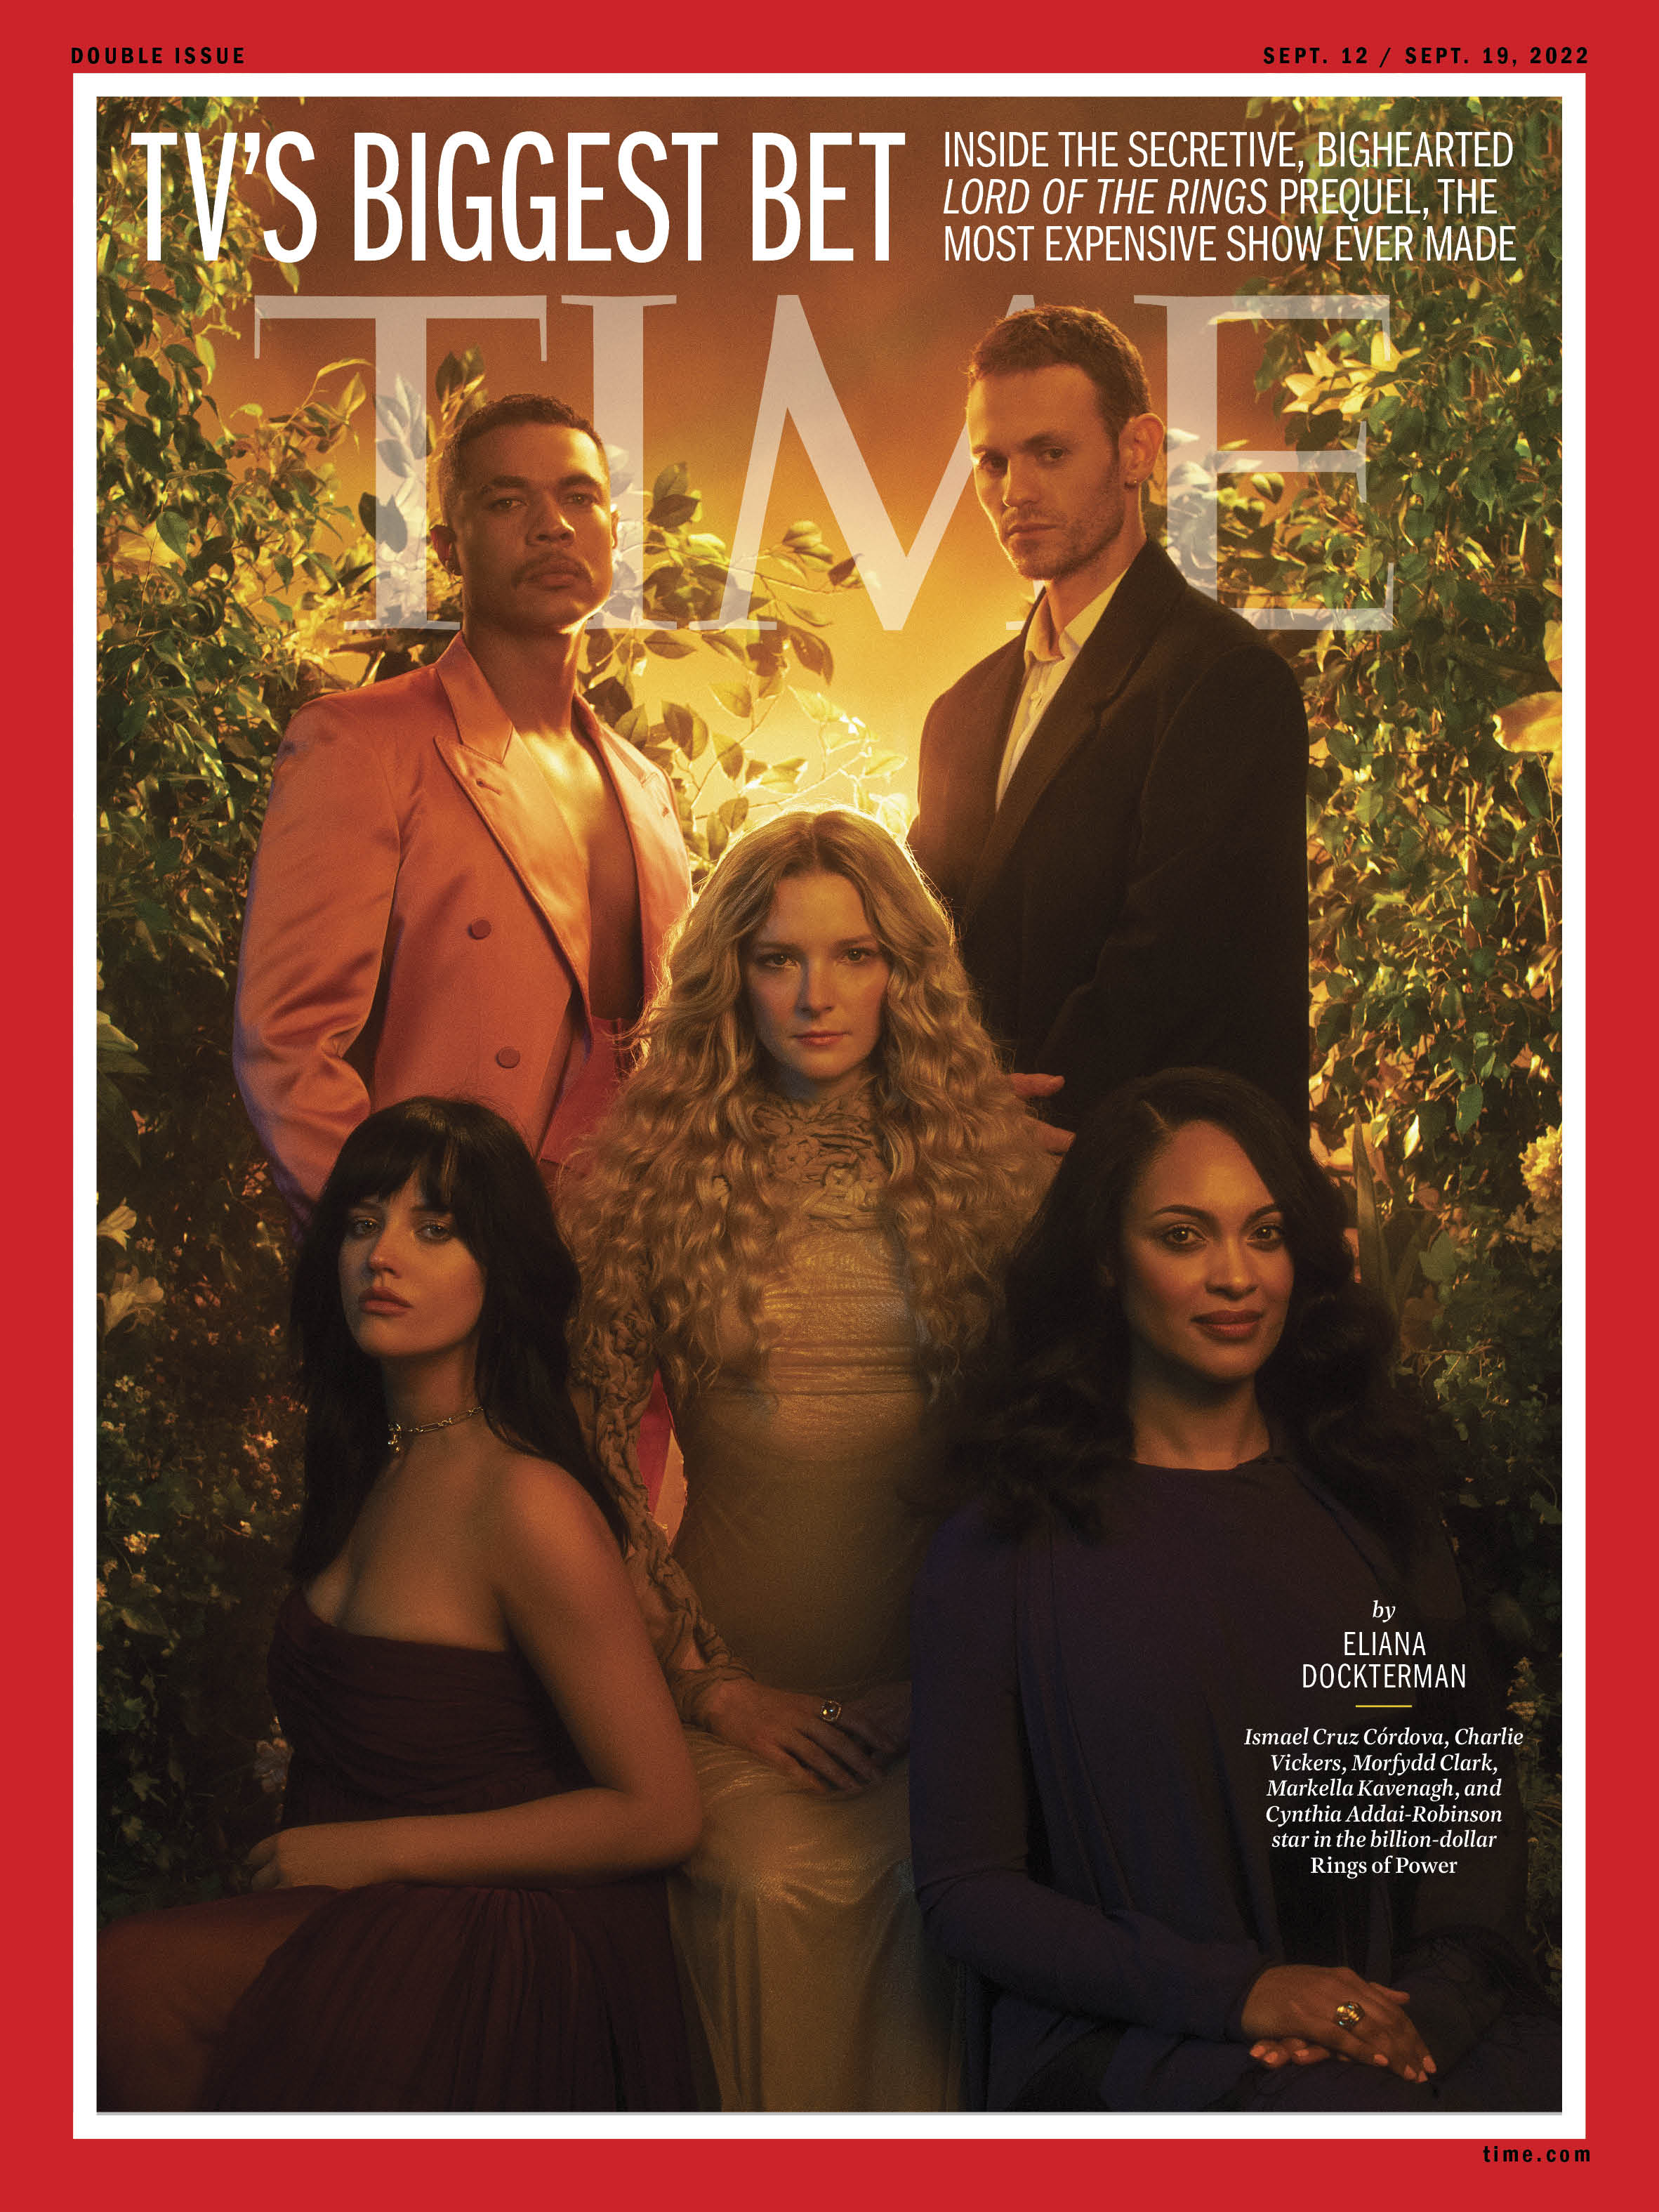 Lord of the Rings Prequel Time Magazine cover